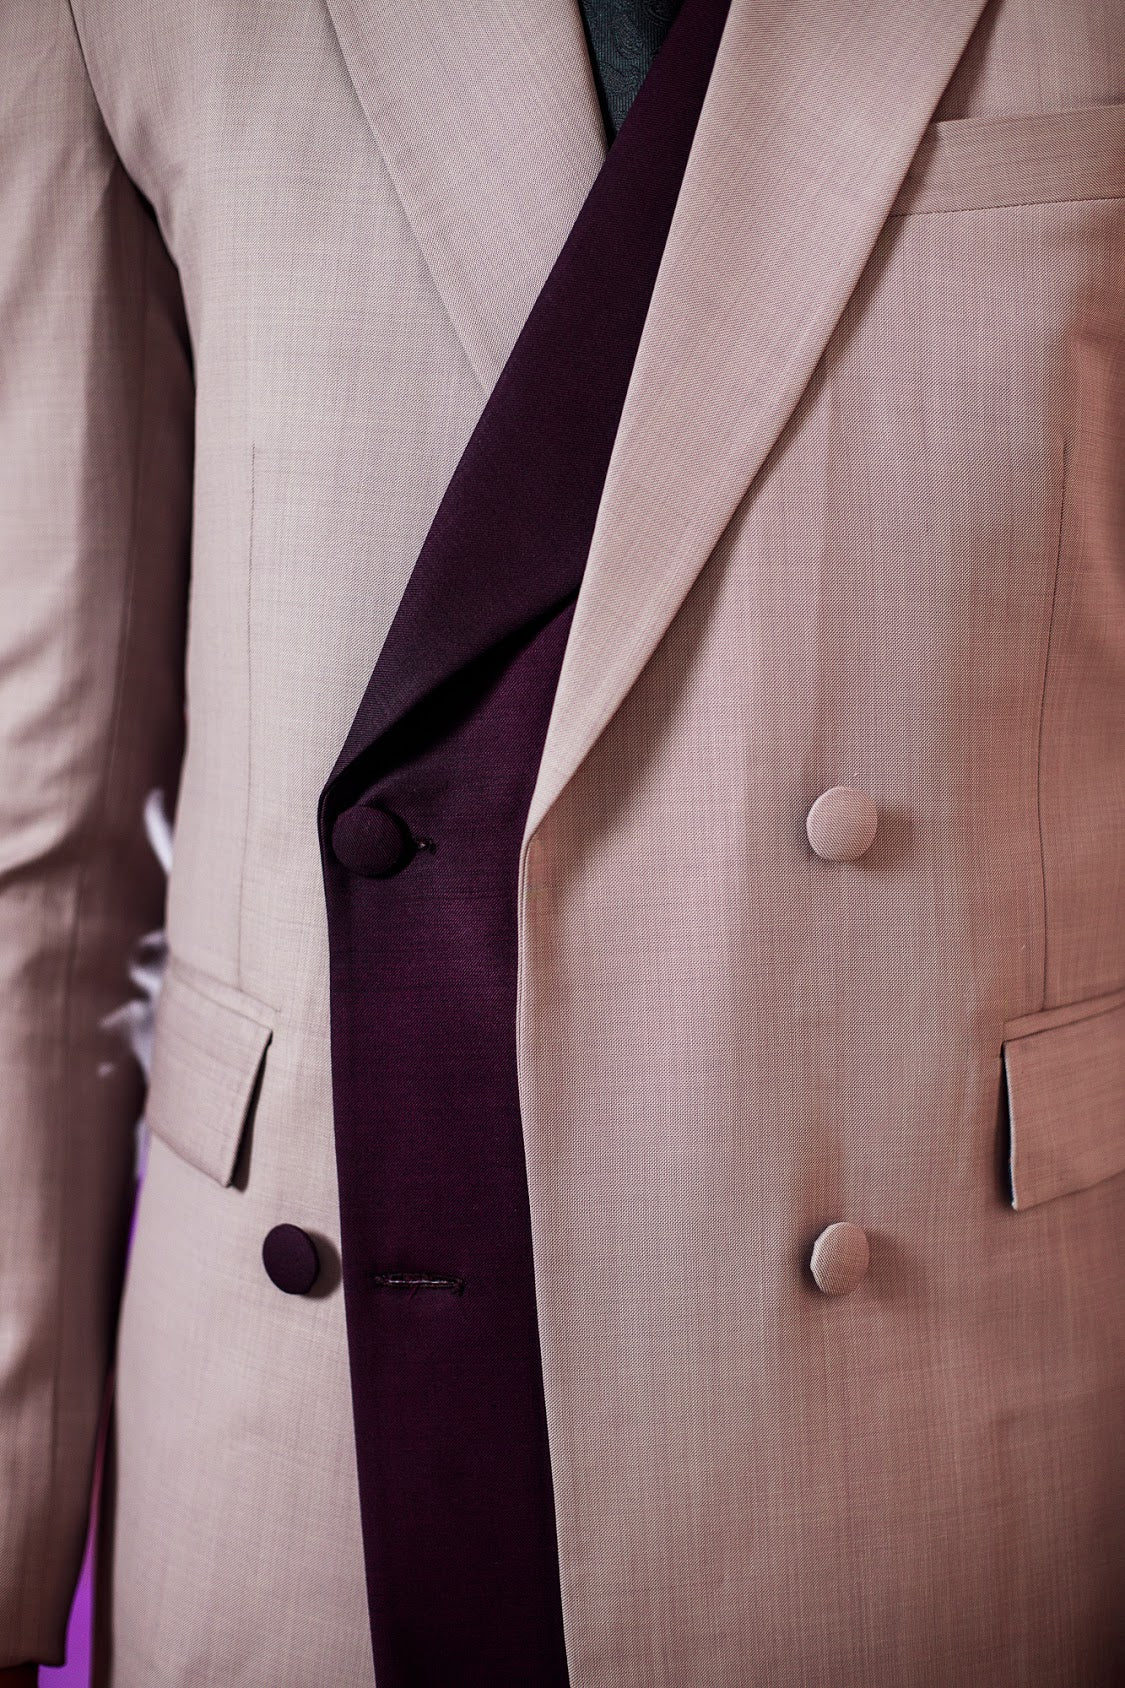 Lilac Ddouble Breasted Suit, Purple Details and Pant